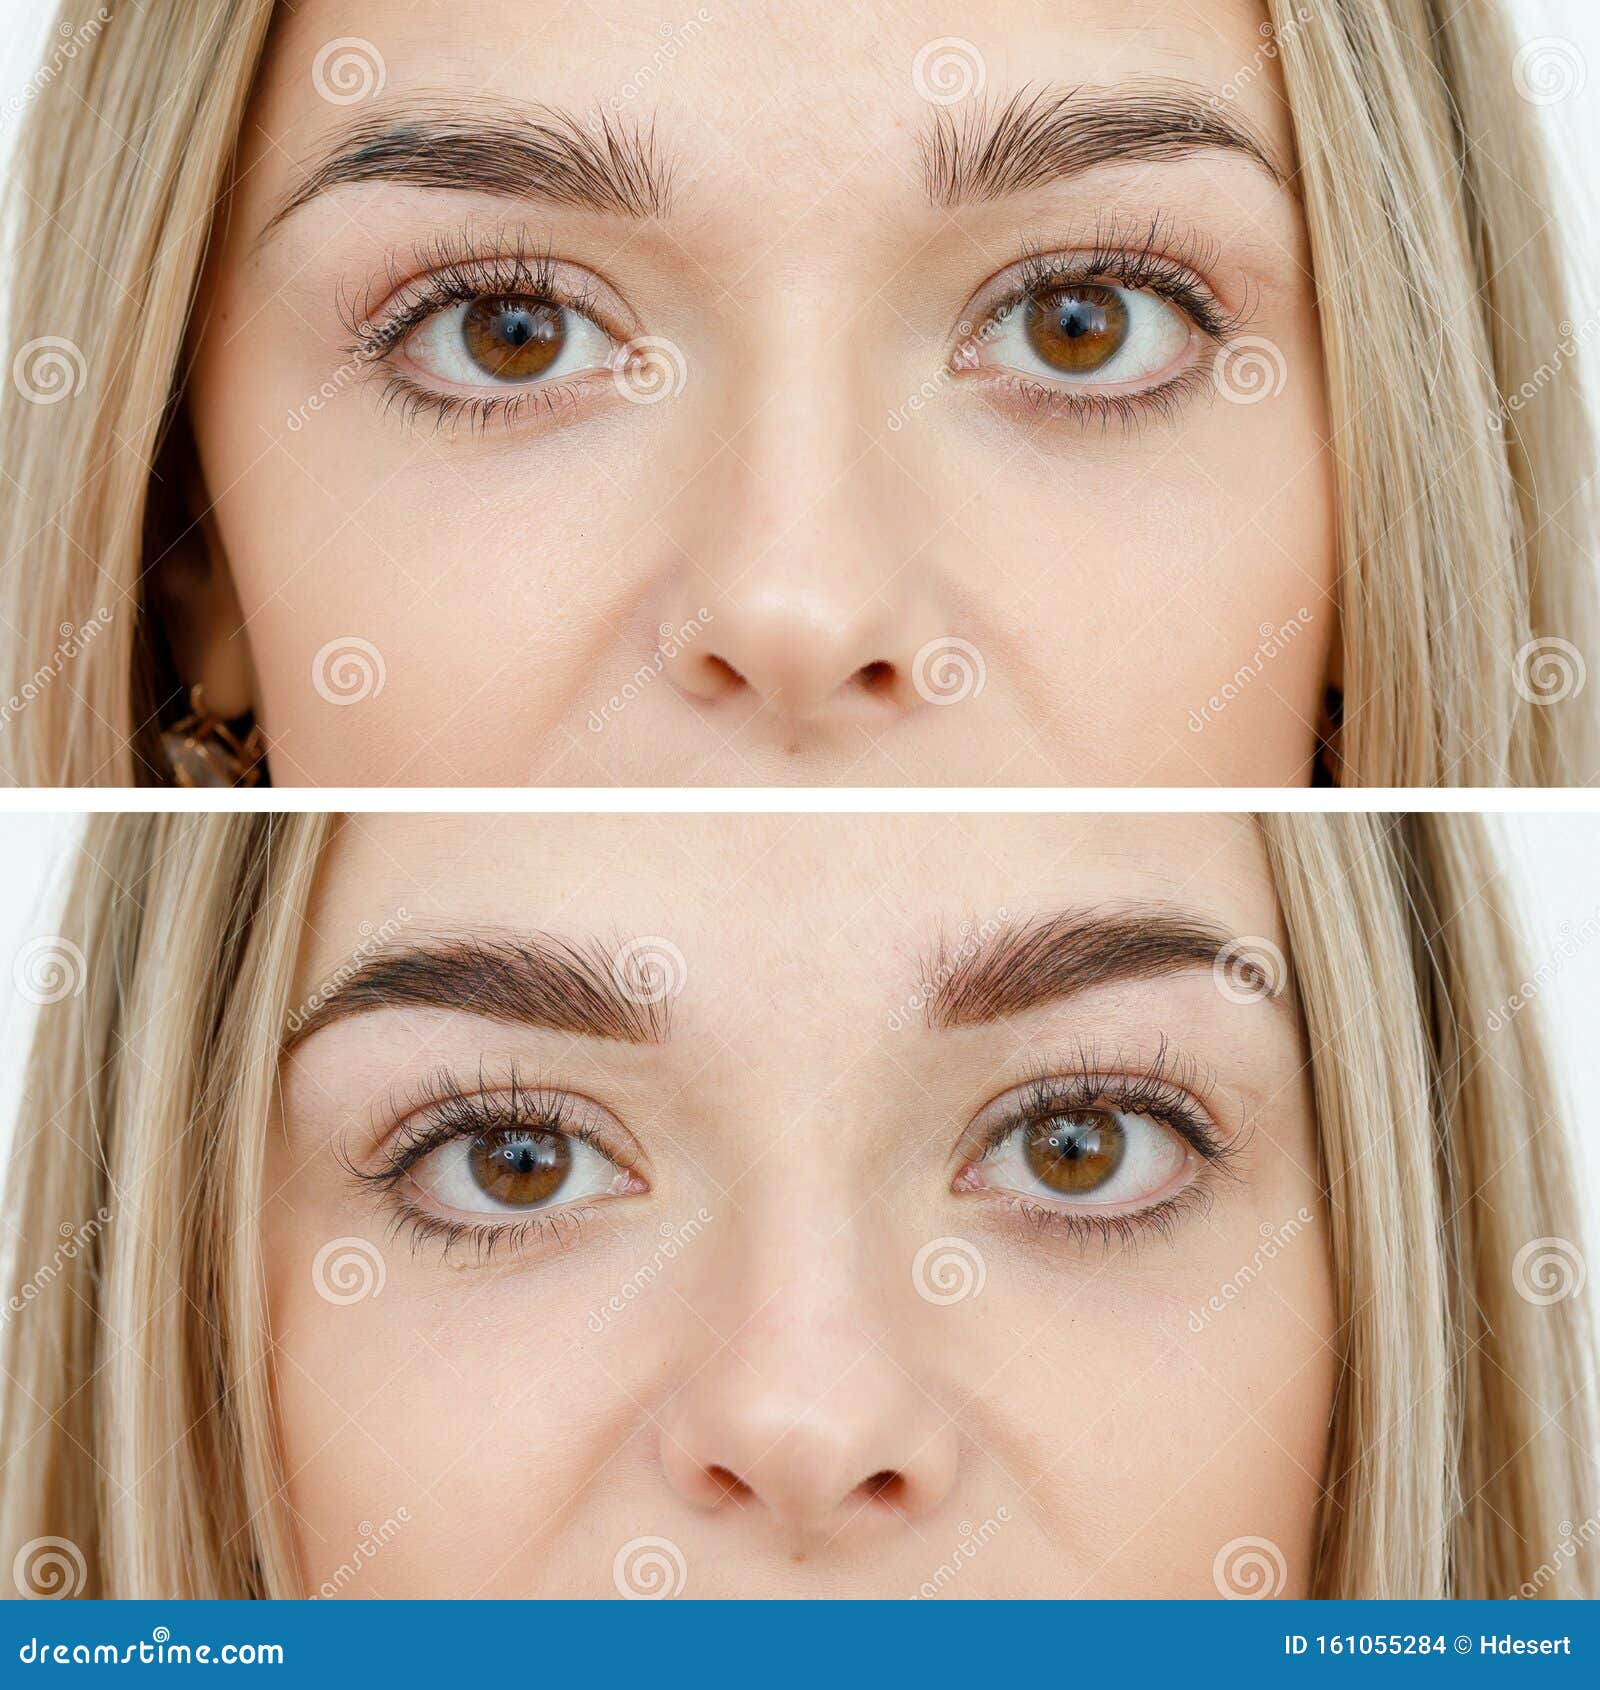 How Painful Is Microblading